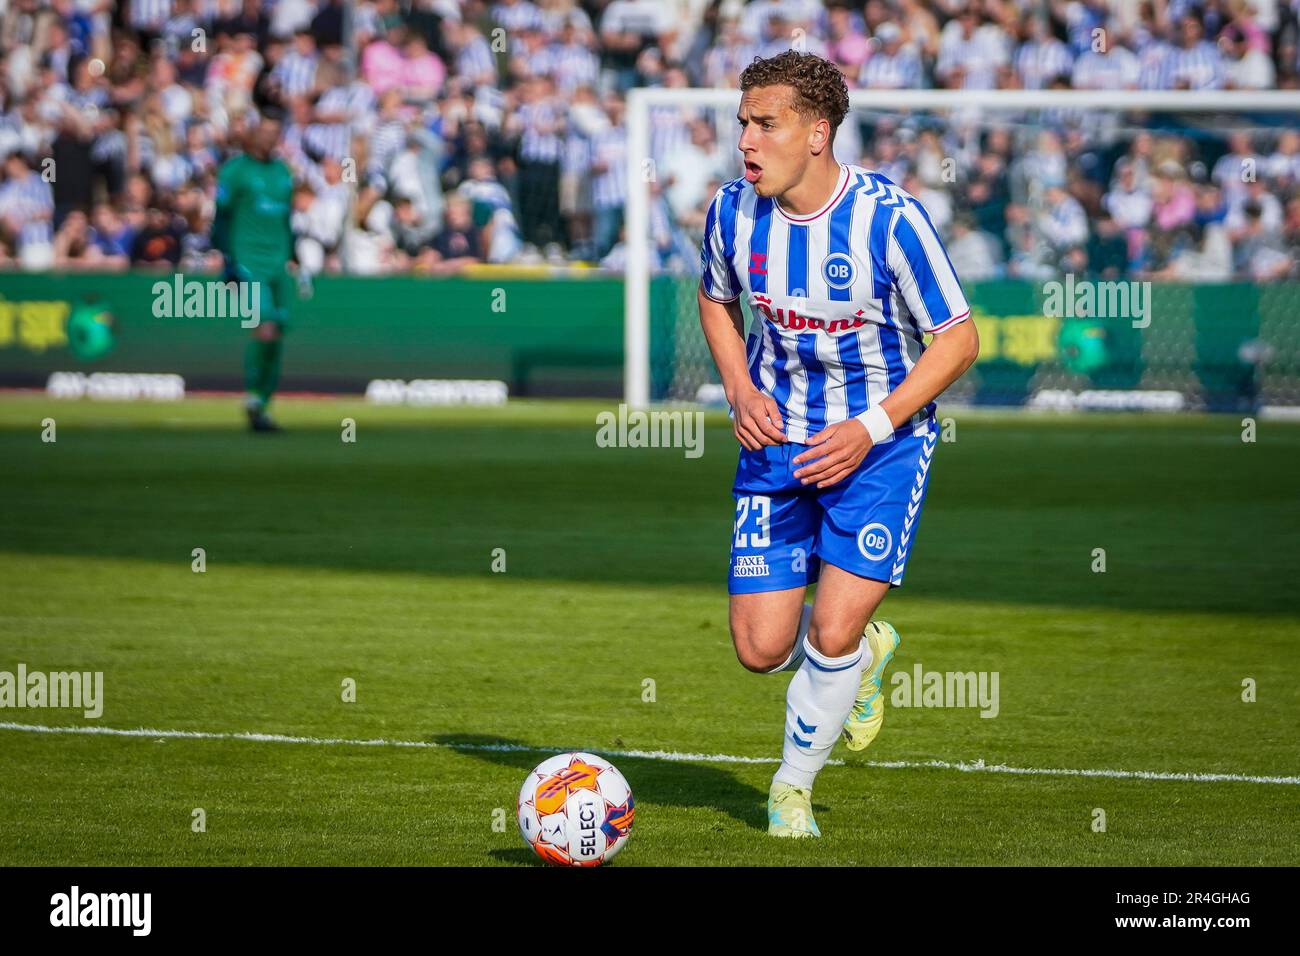 Odense, 26th, May 2023. Aske Adelgaard (23) of seen during 3F Superliga match between Odense Boldklub and AC Horsens at Nature Energy Park in Odense. (Photo credit: Photo -